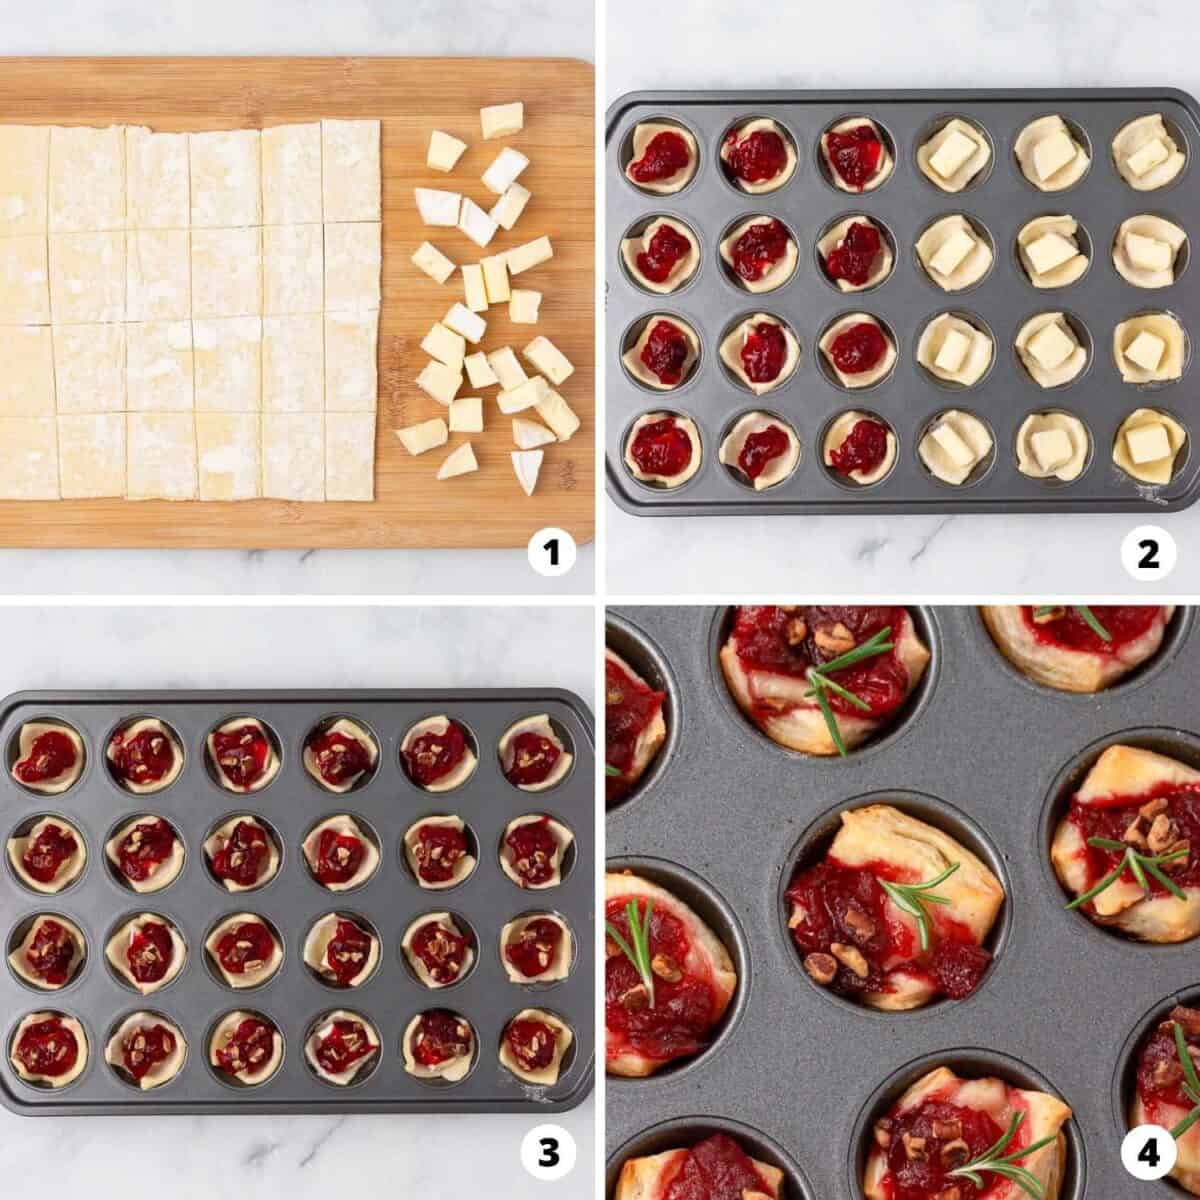 Showing how to make cranberry brie bites.